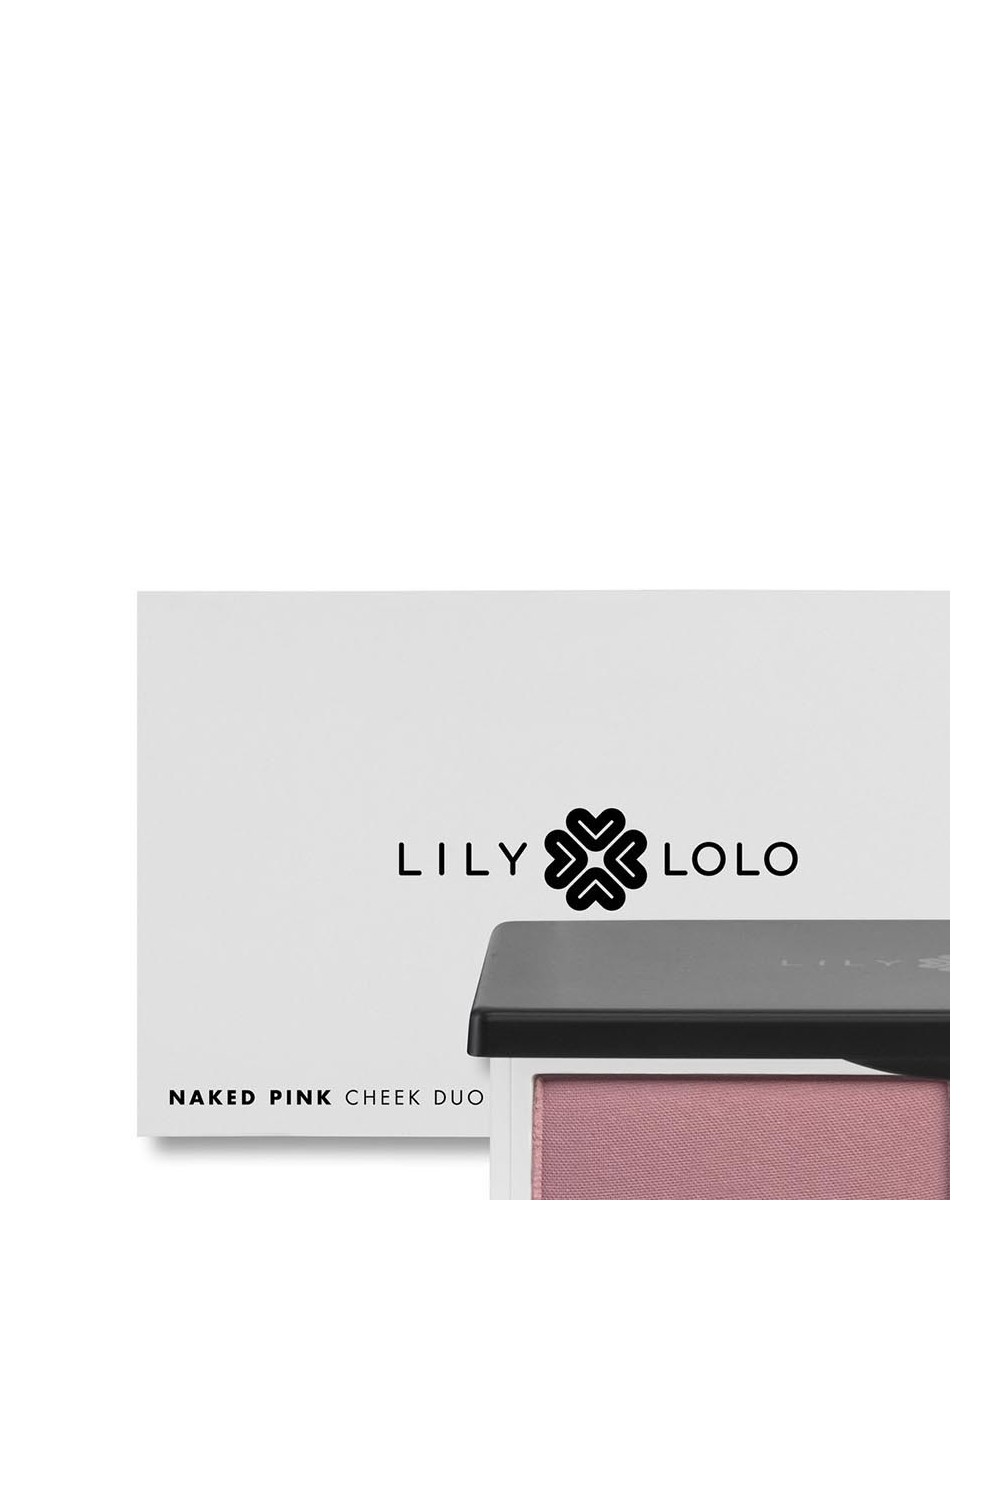 Lily Lolo Colorete Duo Compacto Naked Pink 1un